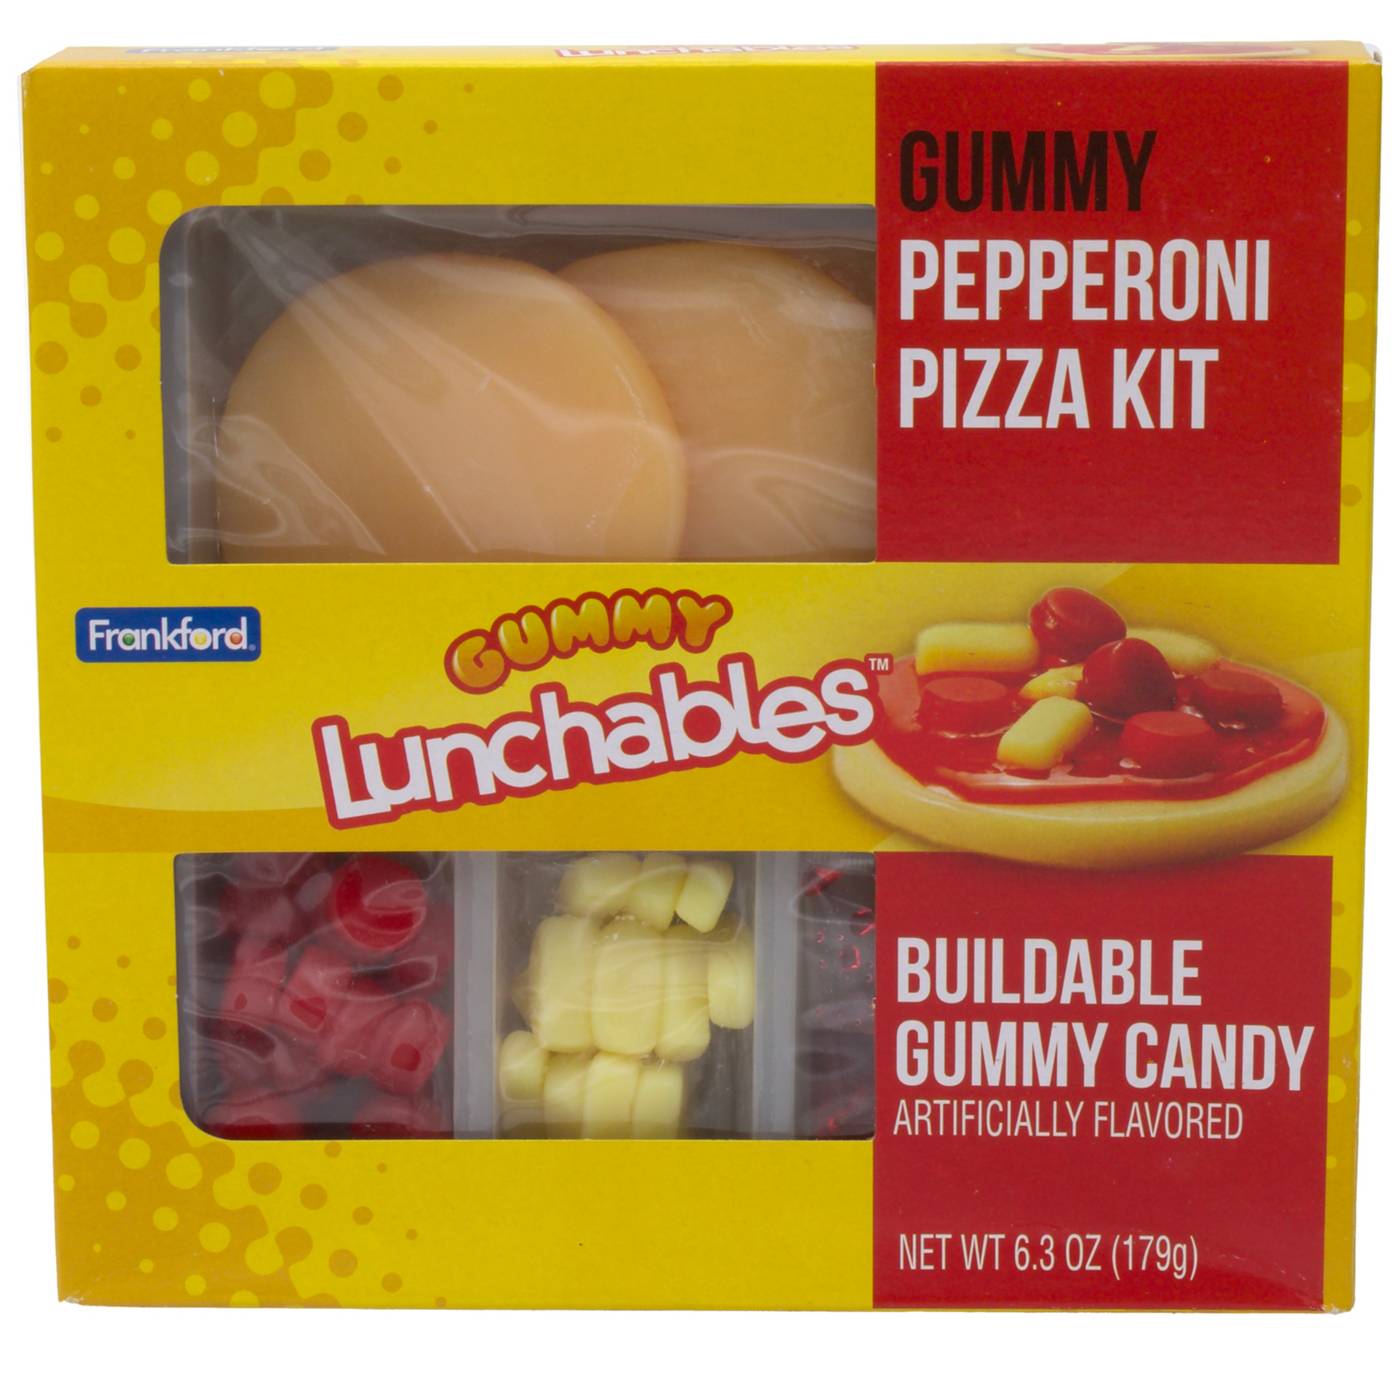 Frankford Lunchables Gummy Pizza Kit Candy; image 1 of 2